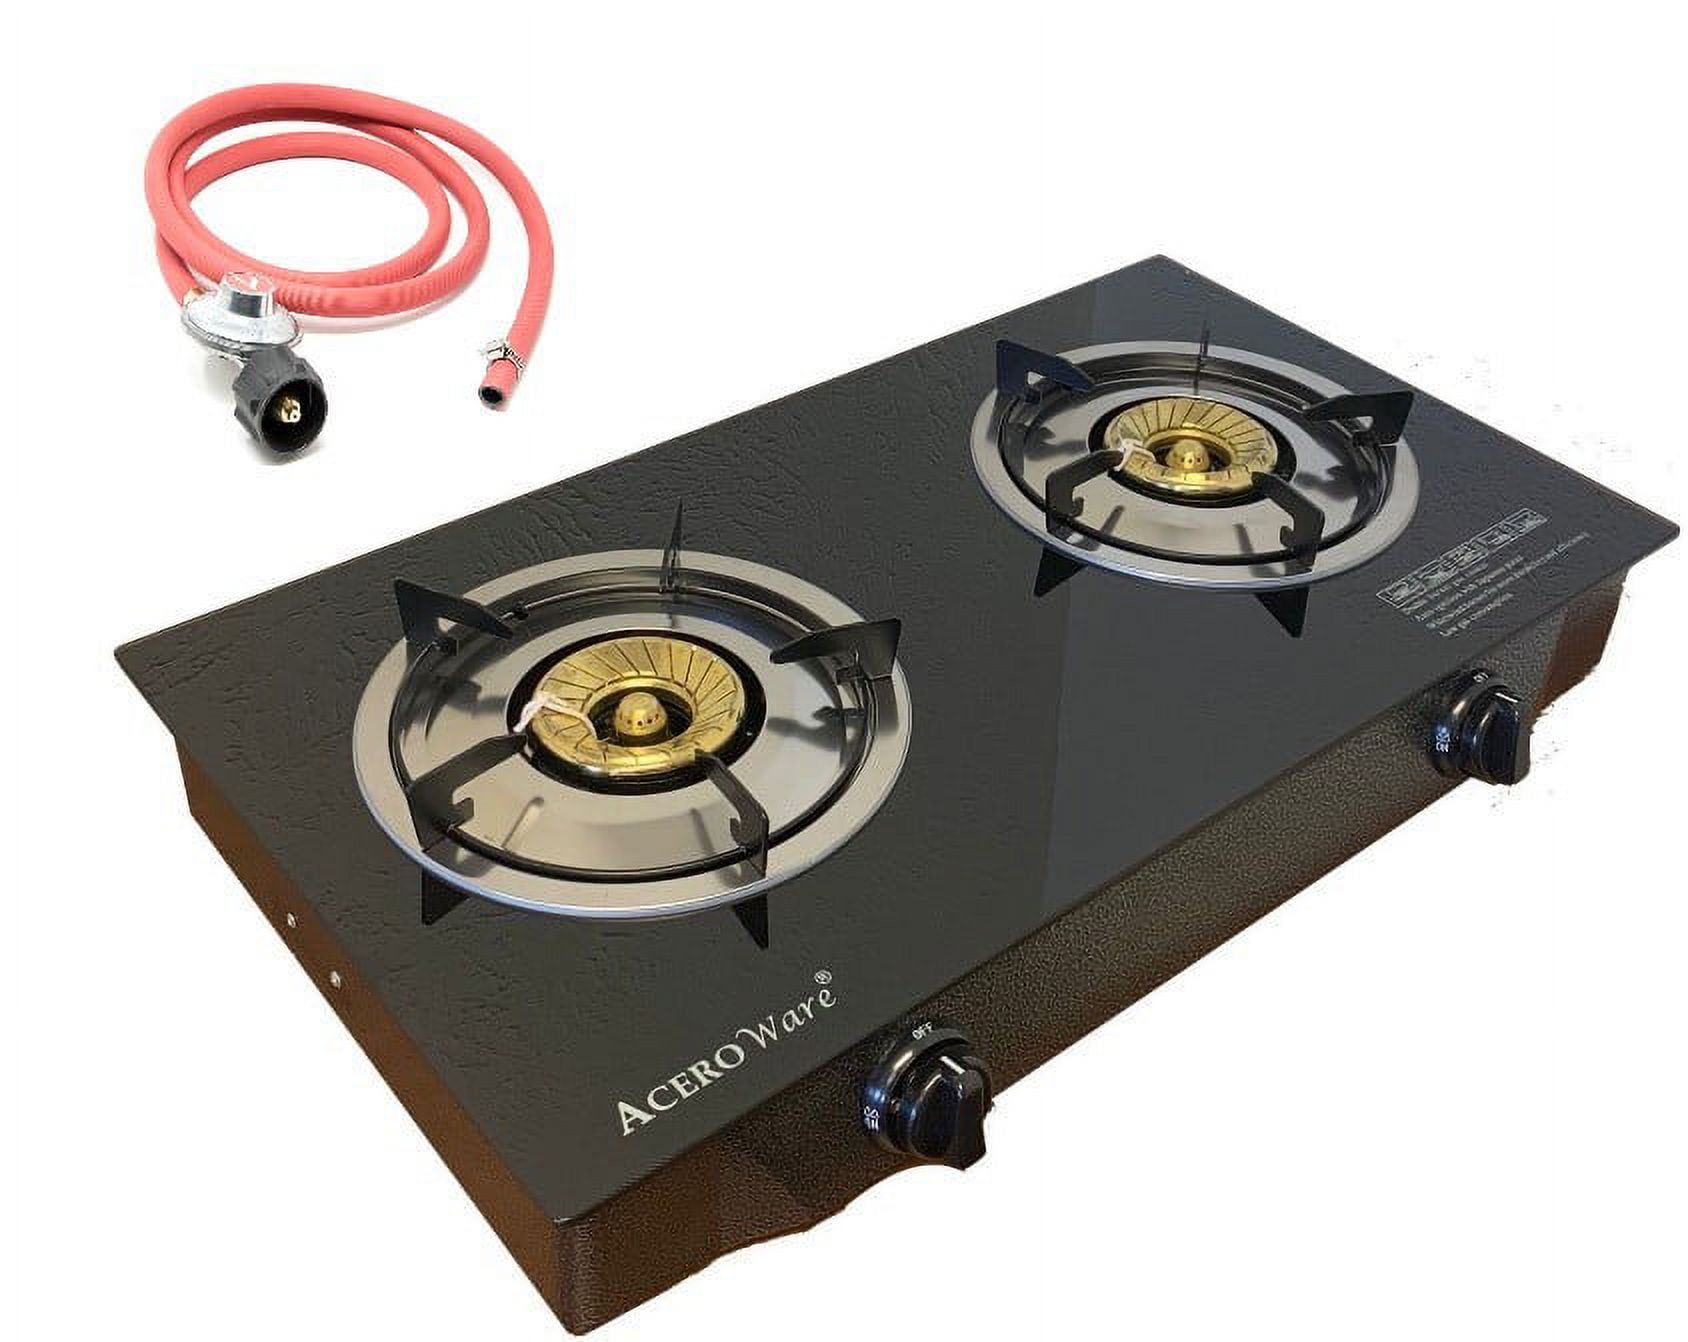 portable tabletop gas stove from